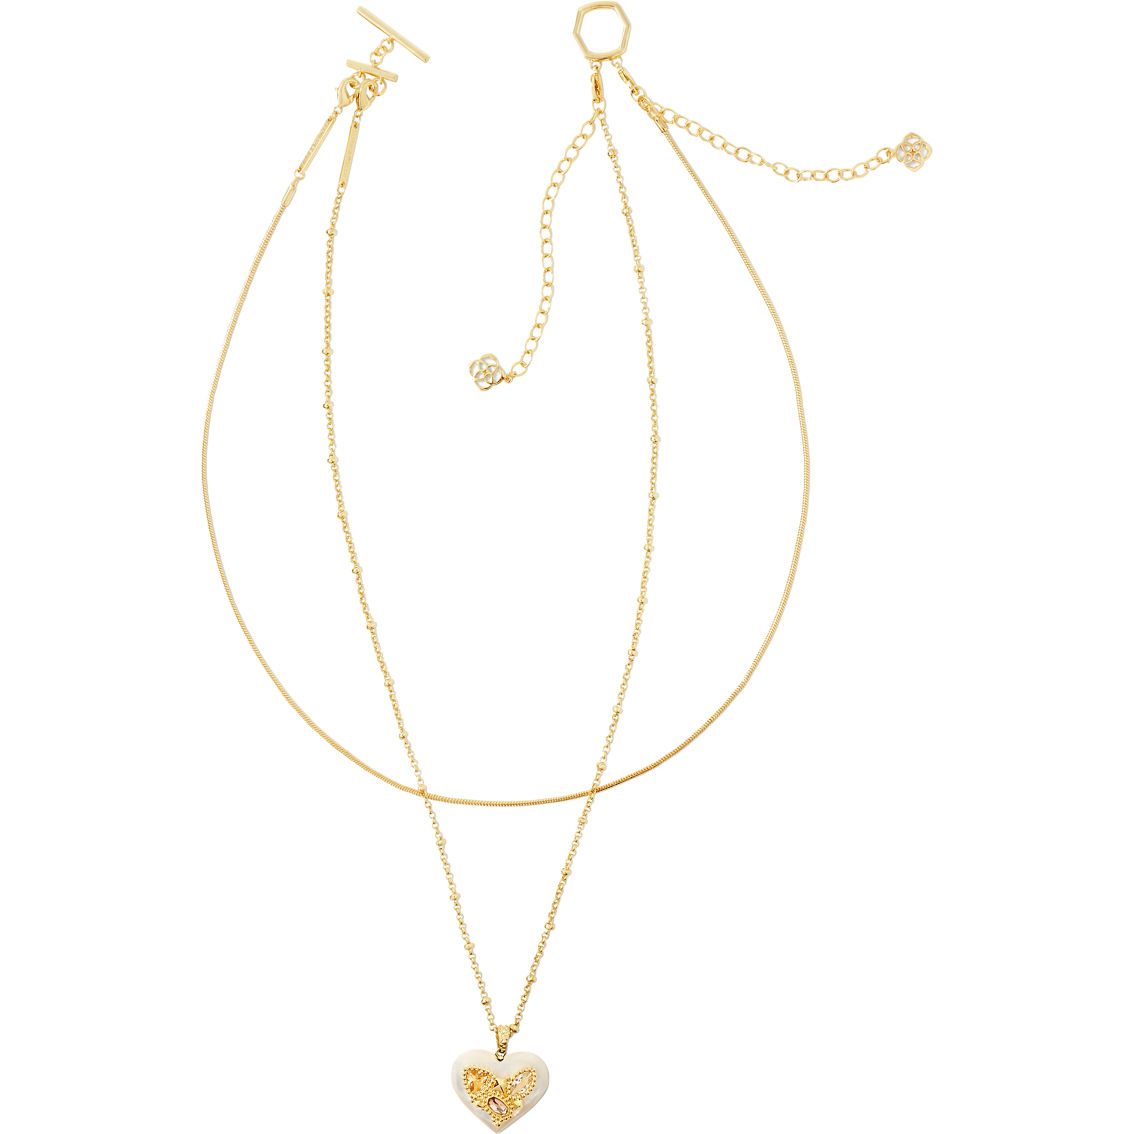 Kendra Scott Penny Ivory Mother of Pearl Goldtone Heart Multi Strand Necklace - Image 2 of 3